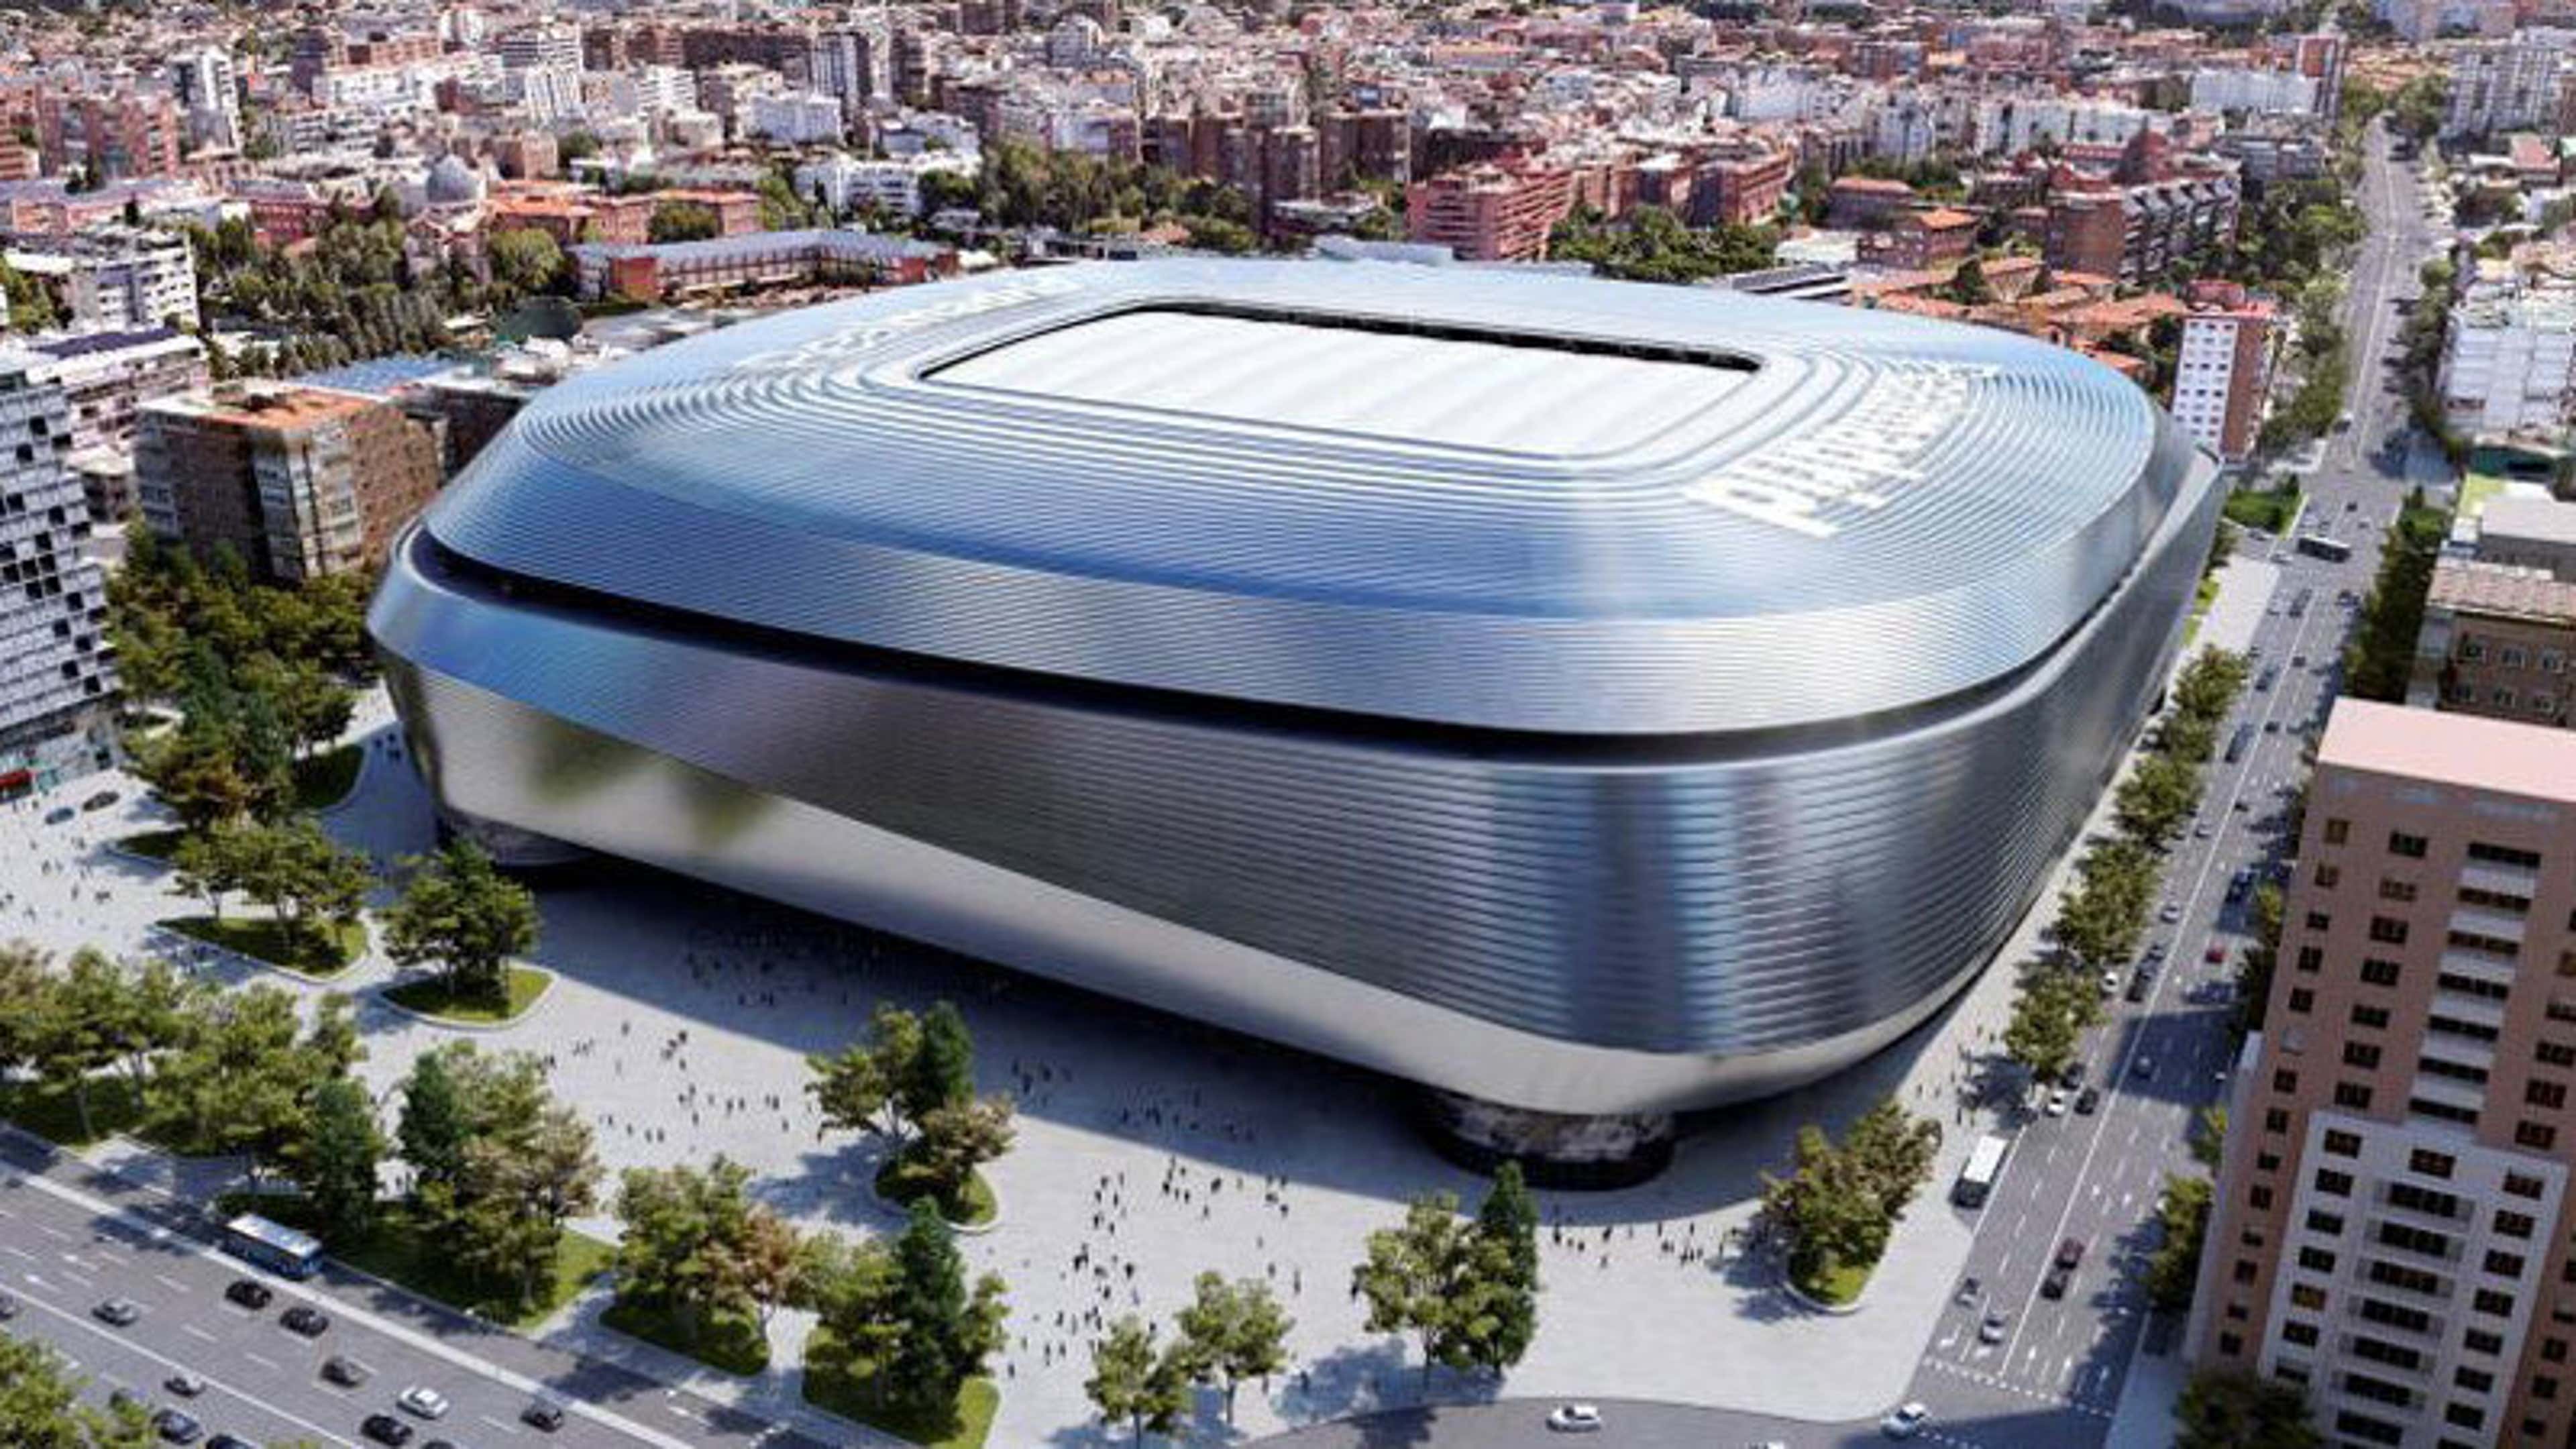 Why is Real Madrid's stadium called the 'Santiago Bernabeu'?